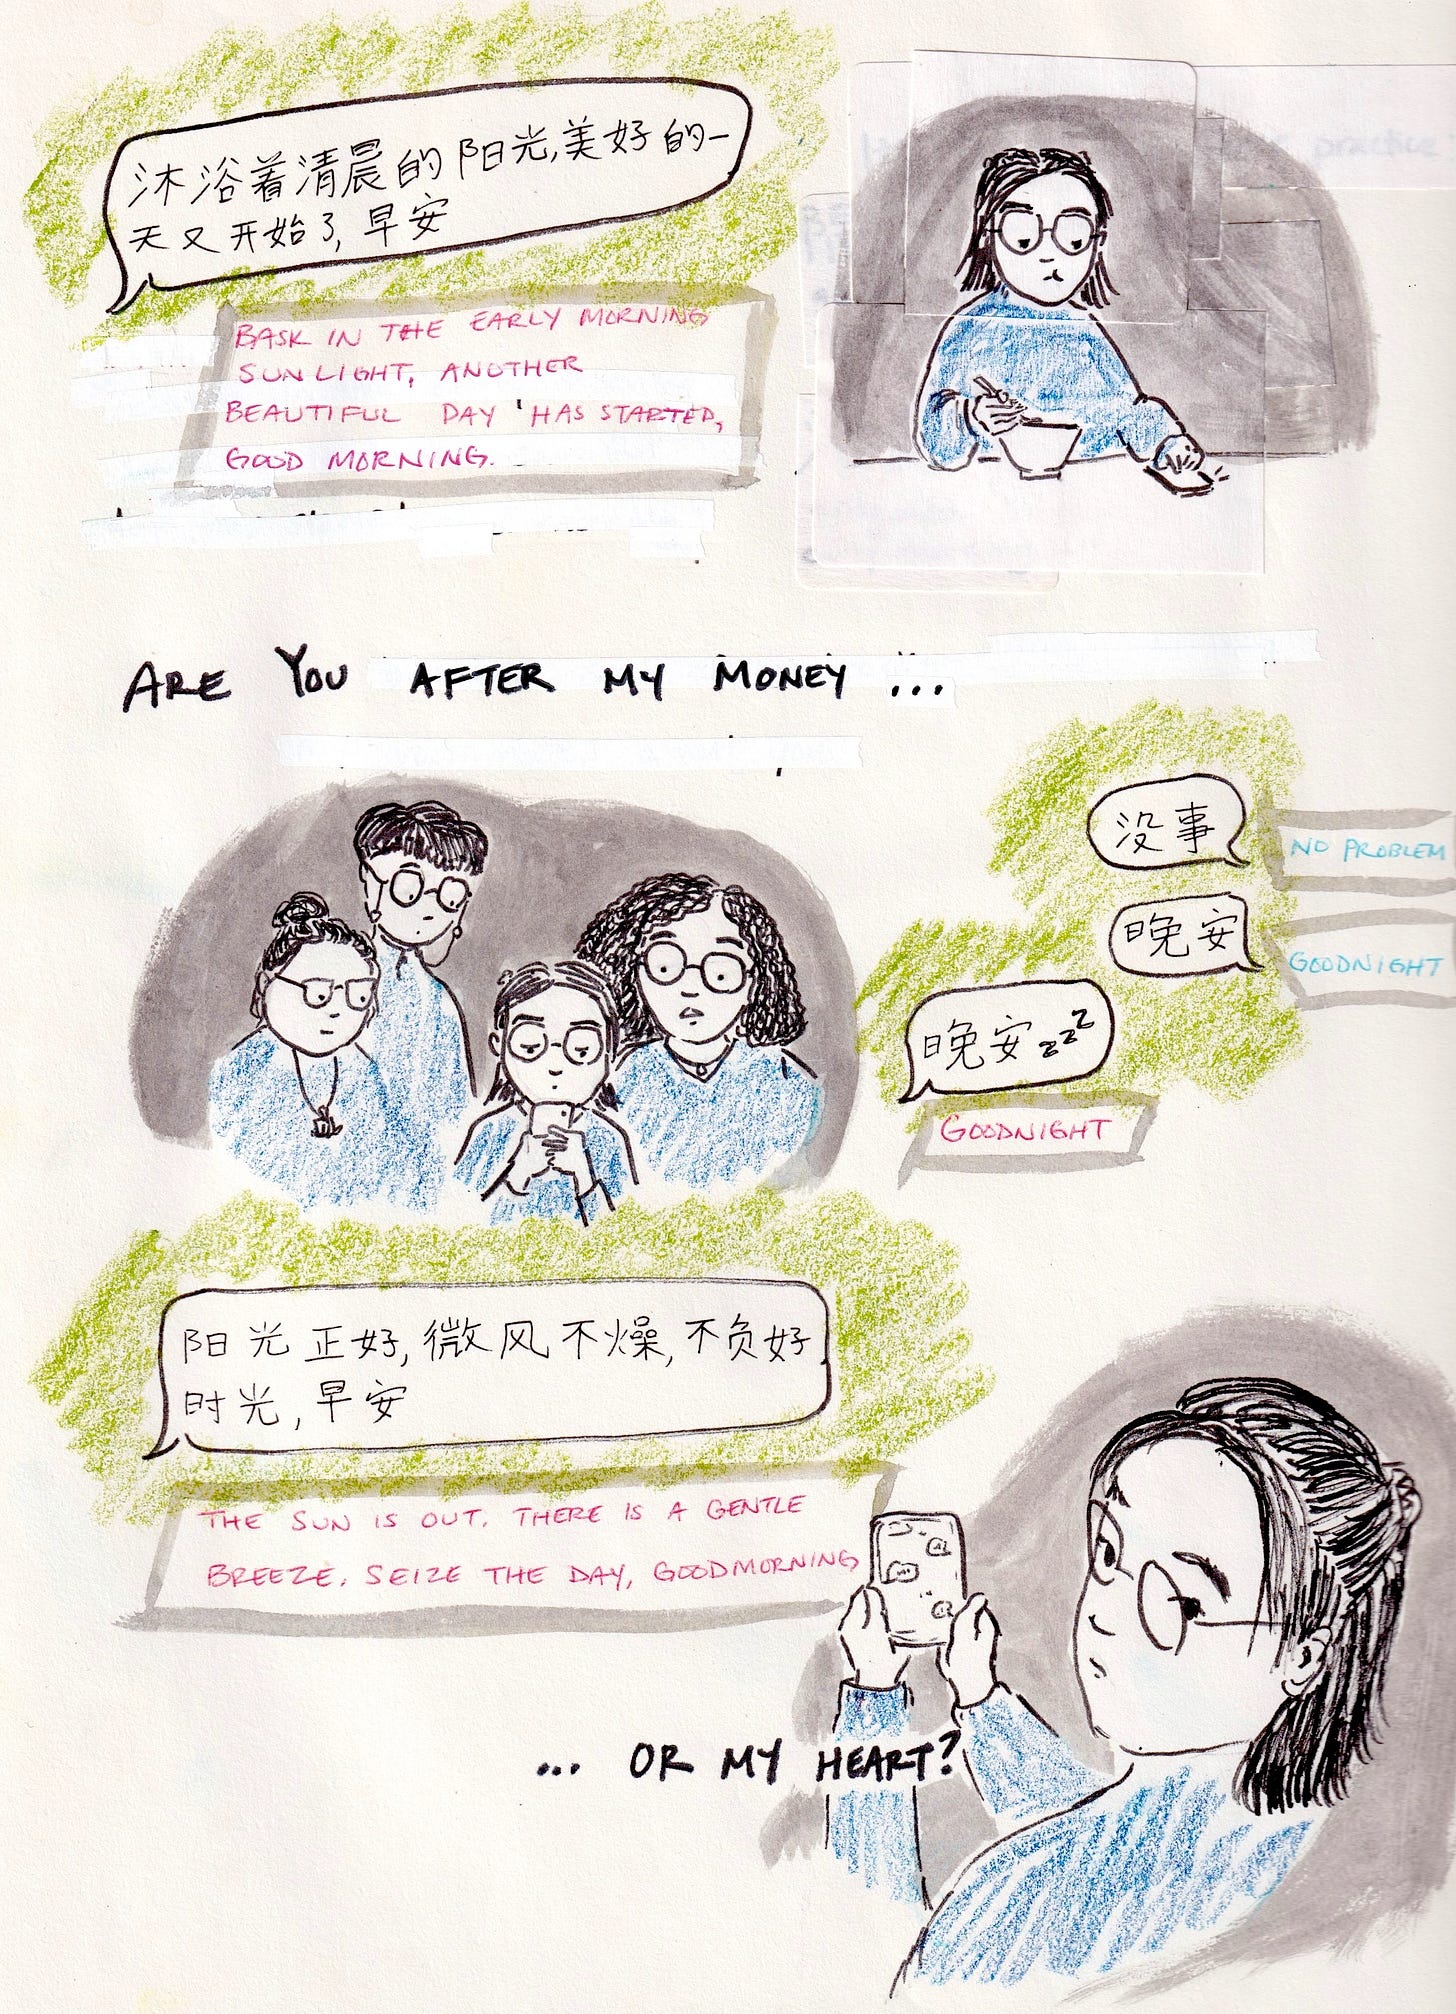 In the final page, we see three final text message exchanges. Mackenzie casually eats a bowl of cereal while looking at texts. The caption reads. “Are you after my money… or my heart?” In the first part of the sentence Mackenzie looks at the phone with roommates surrounding, also interested in the text. In the last line, we look over Mackenzie’s shoulder, as she looks back at the reader. 